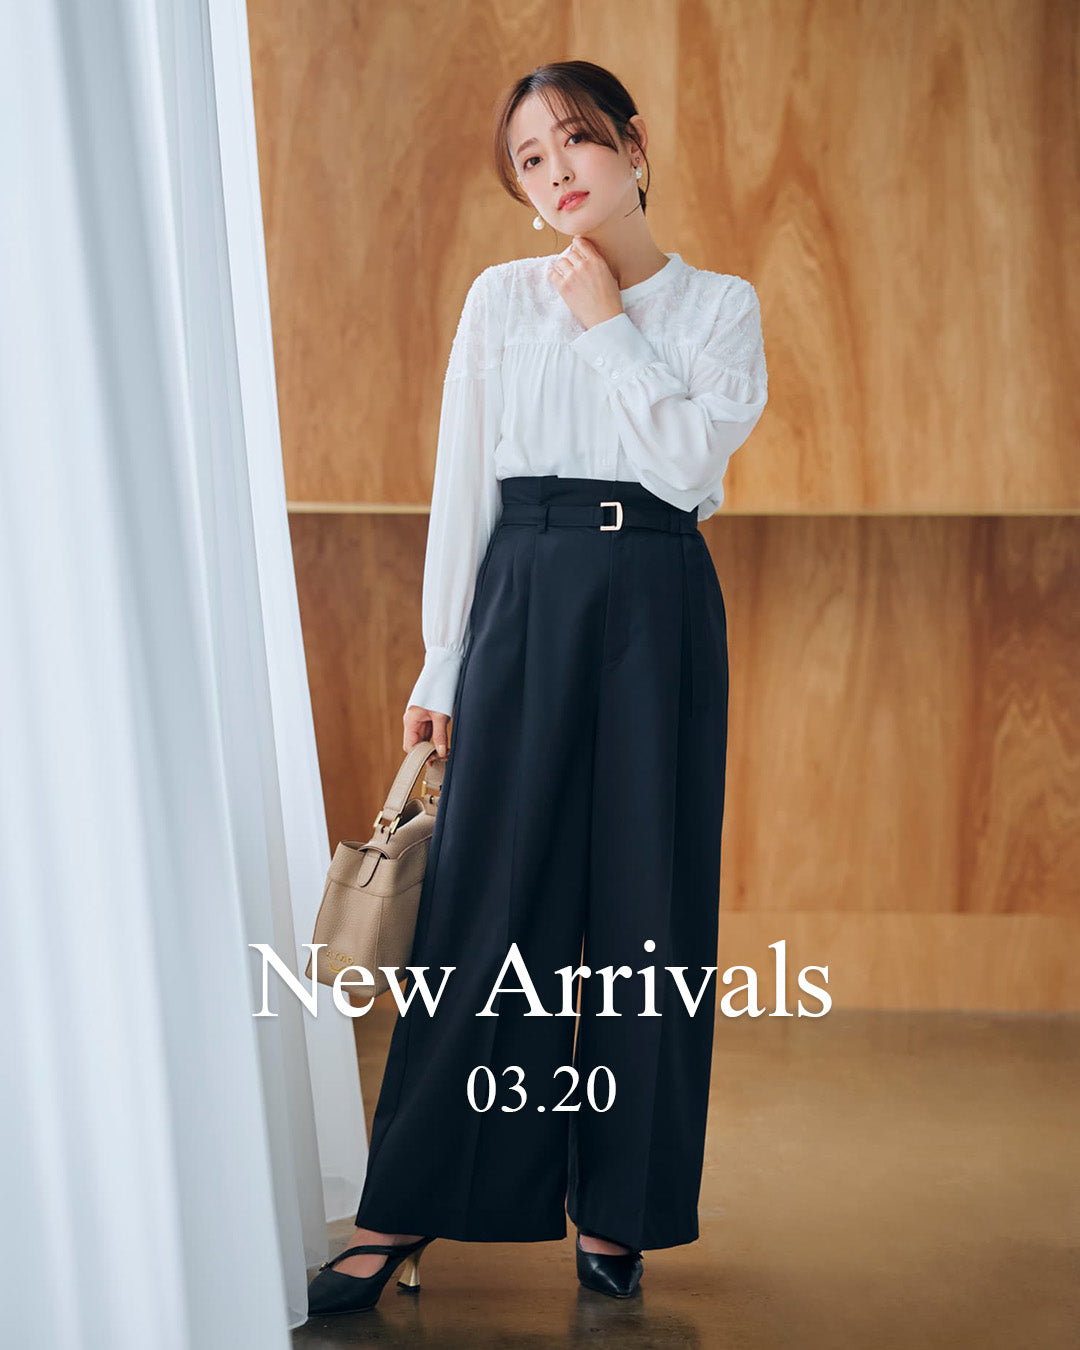 Weekly New Arrivals】03.20(Wed)発売の新作アイテム一覧 – COHINA STORE